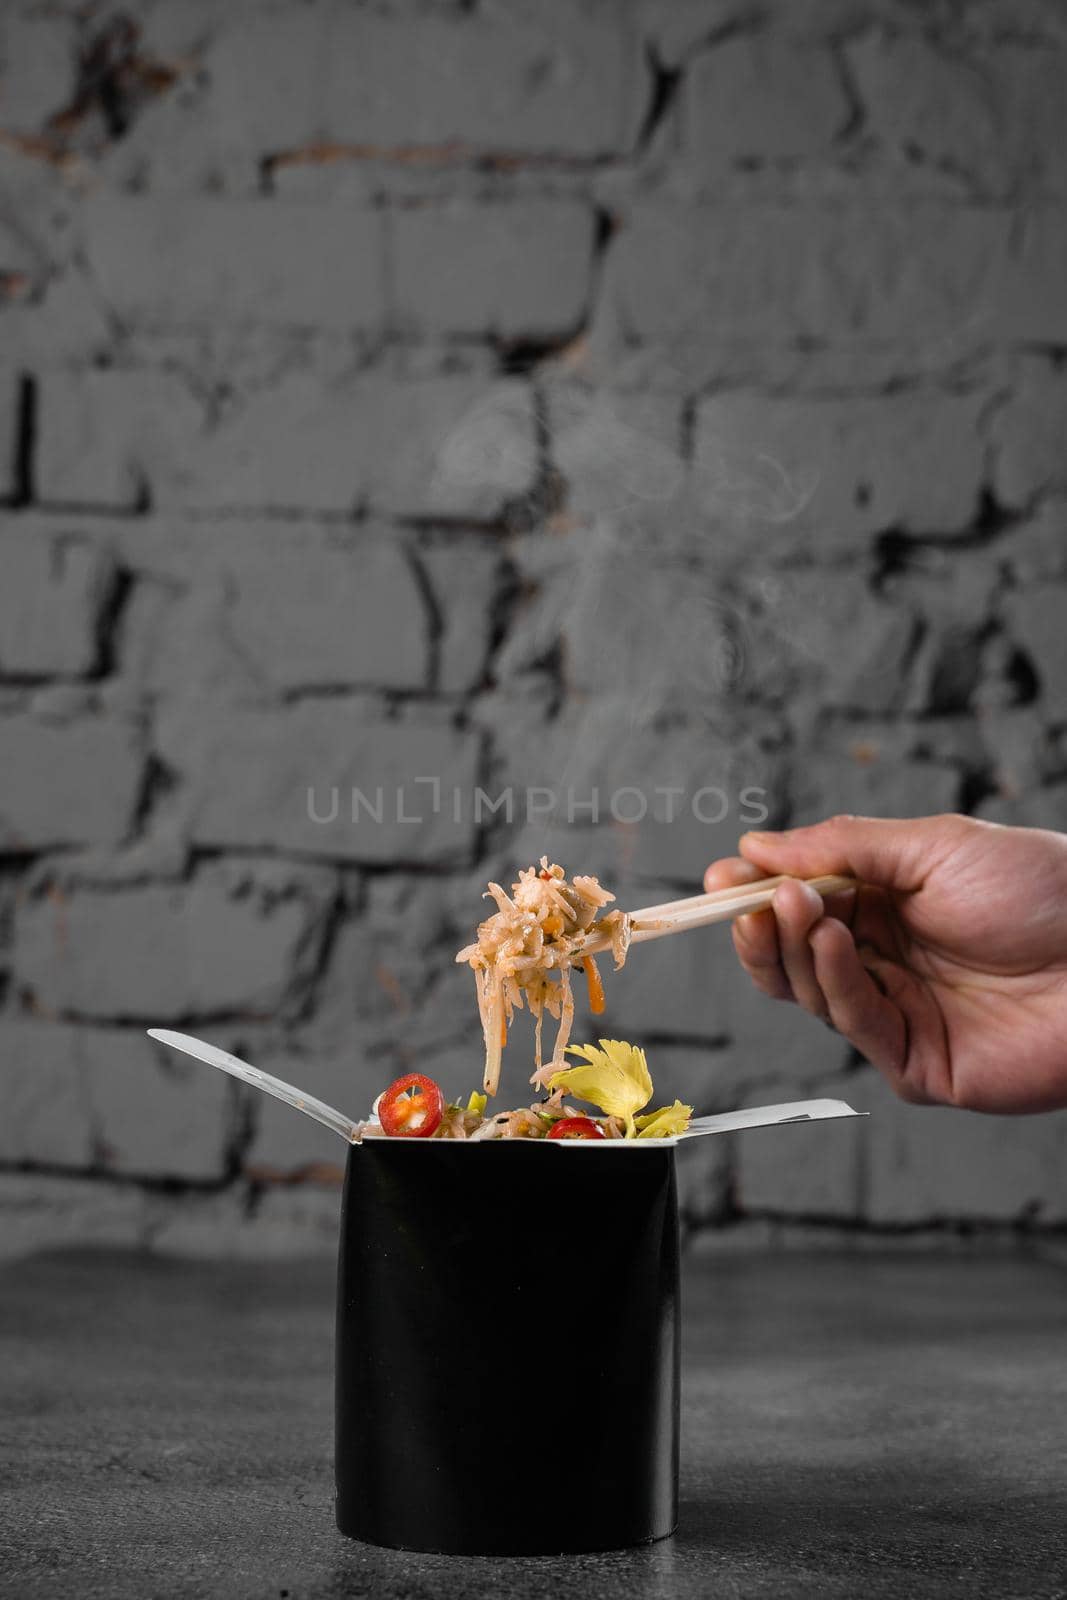 Steaming hot rice in wok box on black background. Holding rice with chinese chopsticks. Asian spicy dish for street restaurant and fast food delivery service